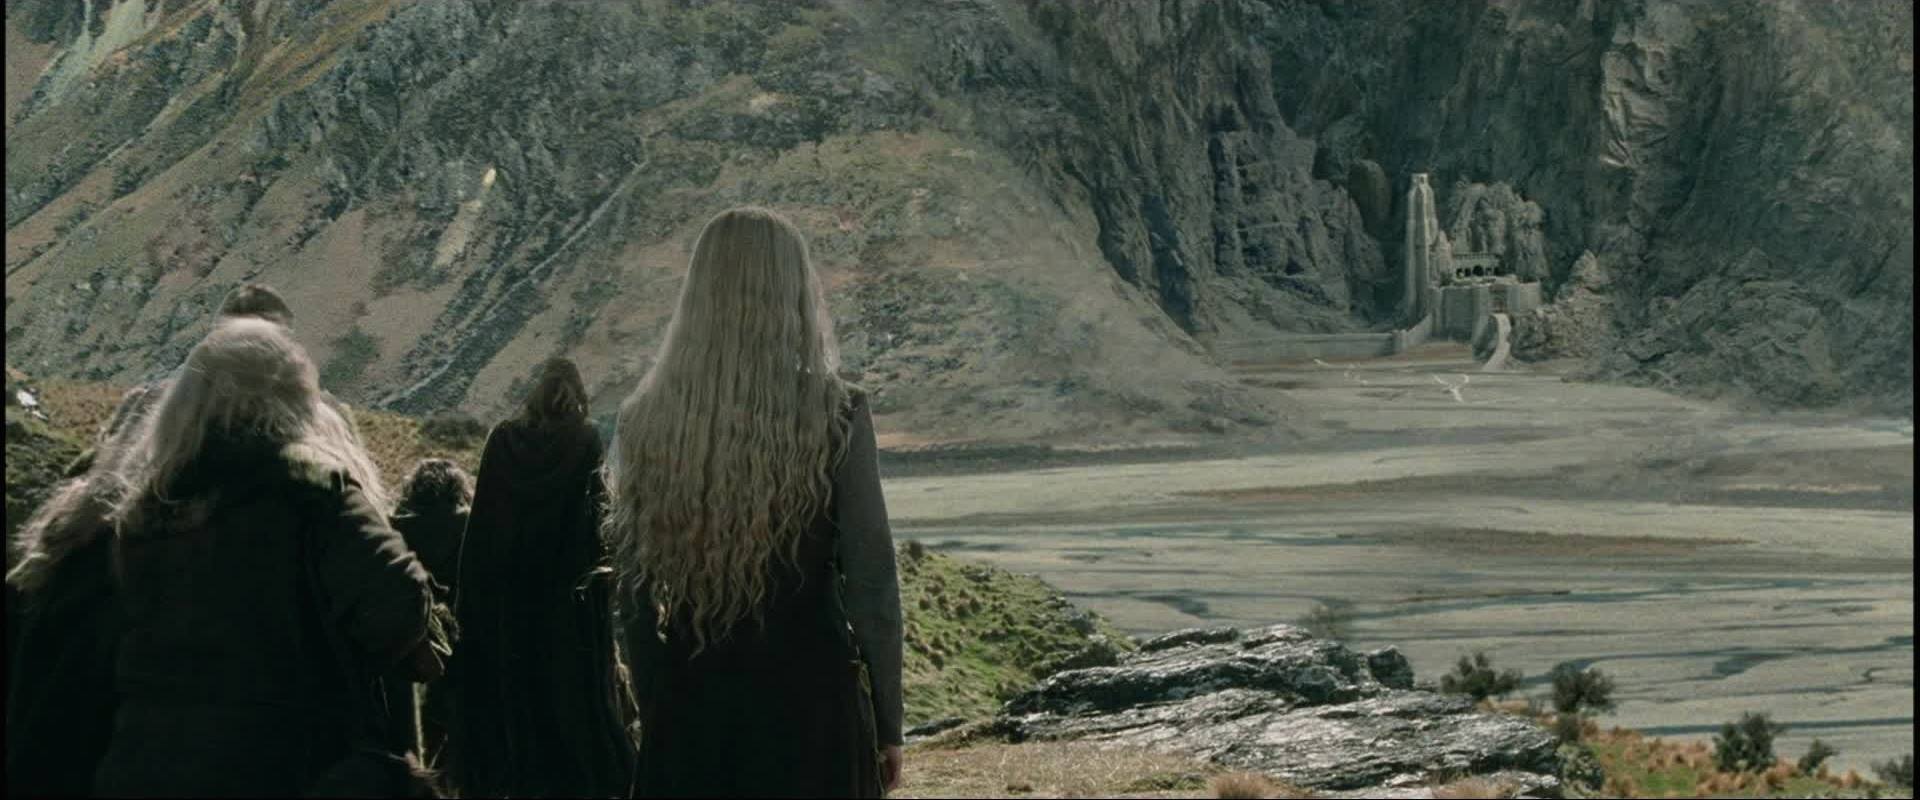 Miranda Otto in The Lord of the Rings: The Two Towers (2002)